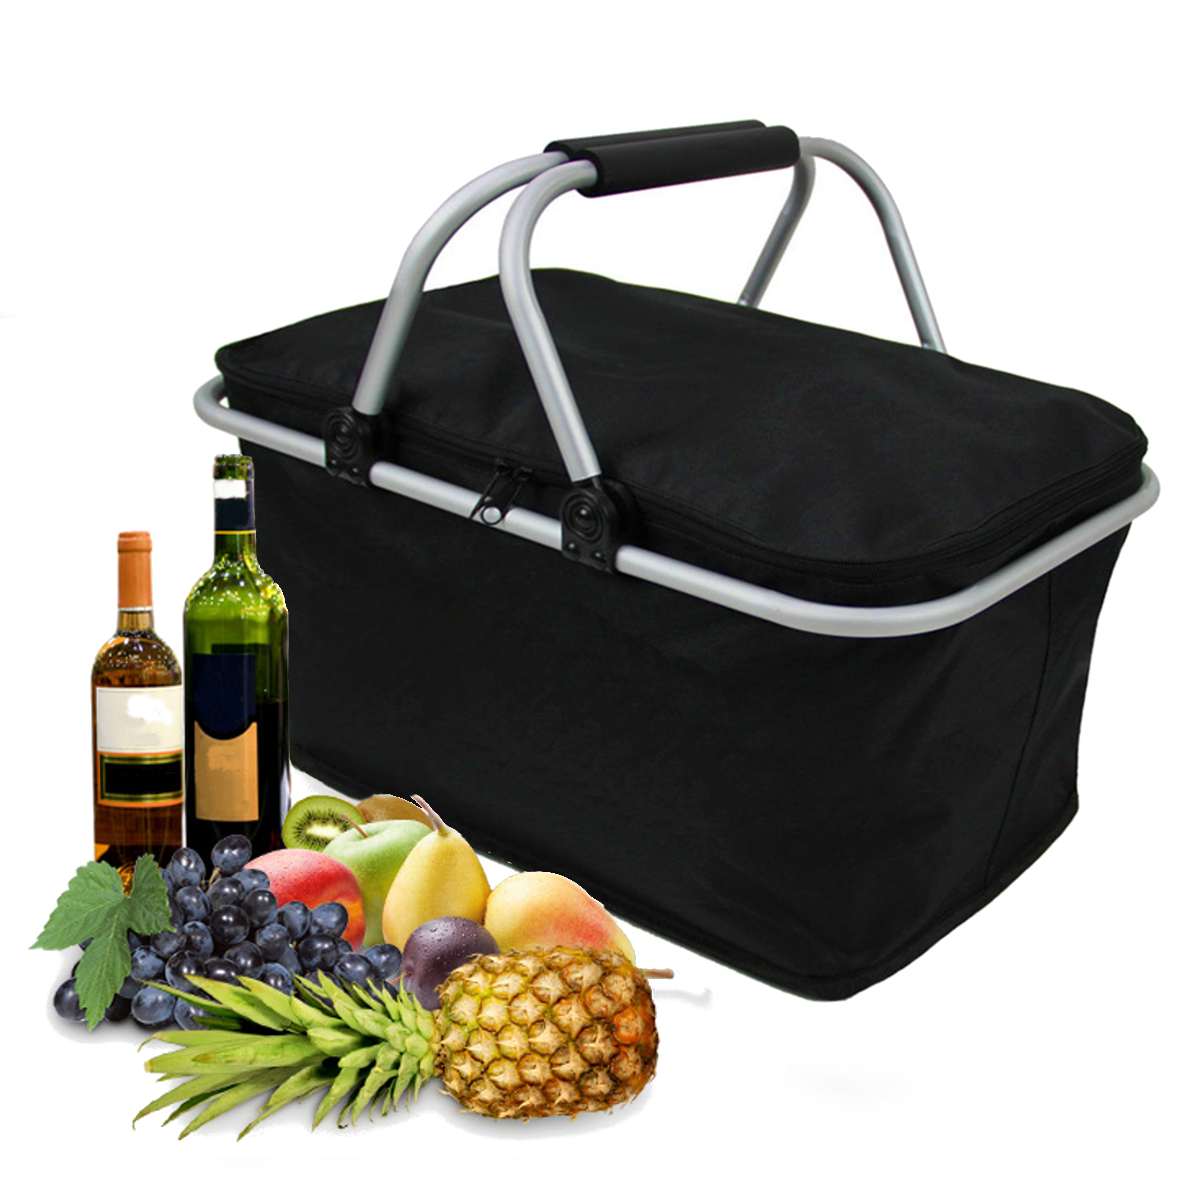 30L Picnic Basket Picnic Bag Insulated Heat Cooler Strong Aluminum Frame Waterproof Lining Collapsible For Camping Picnic